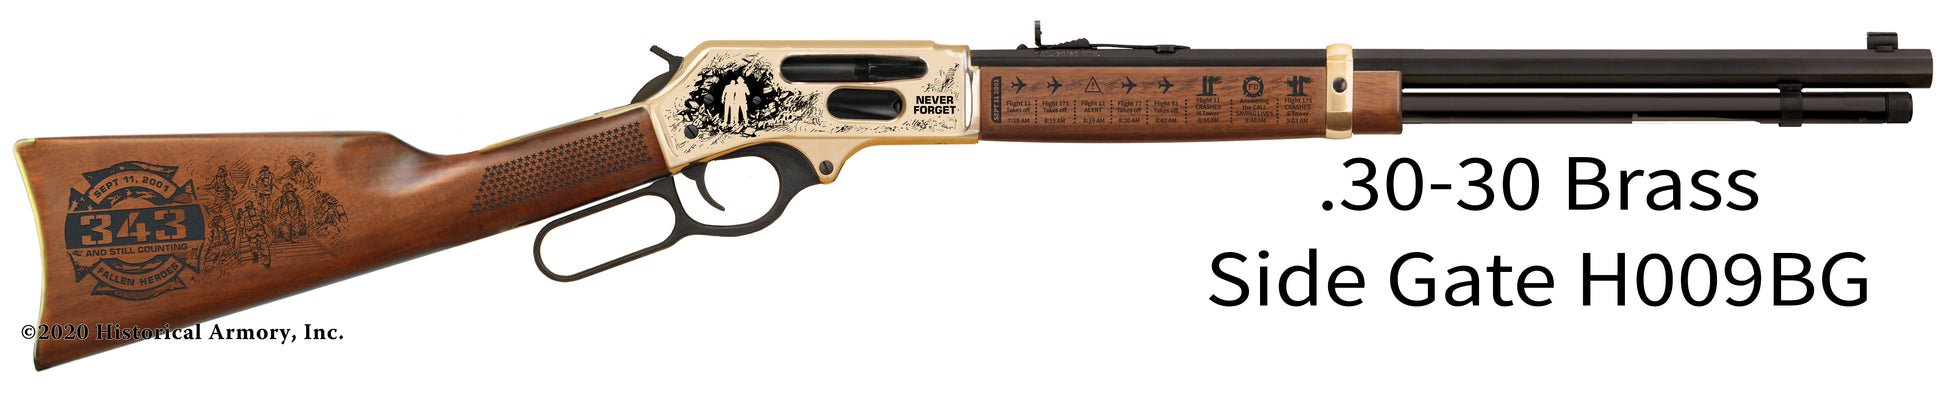 9/11 Firefighter Tribute Engraved Henry Rifle